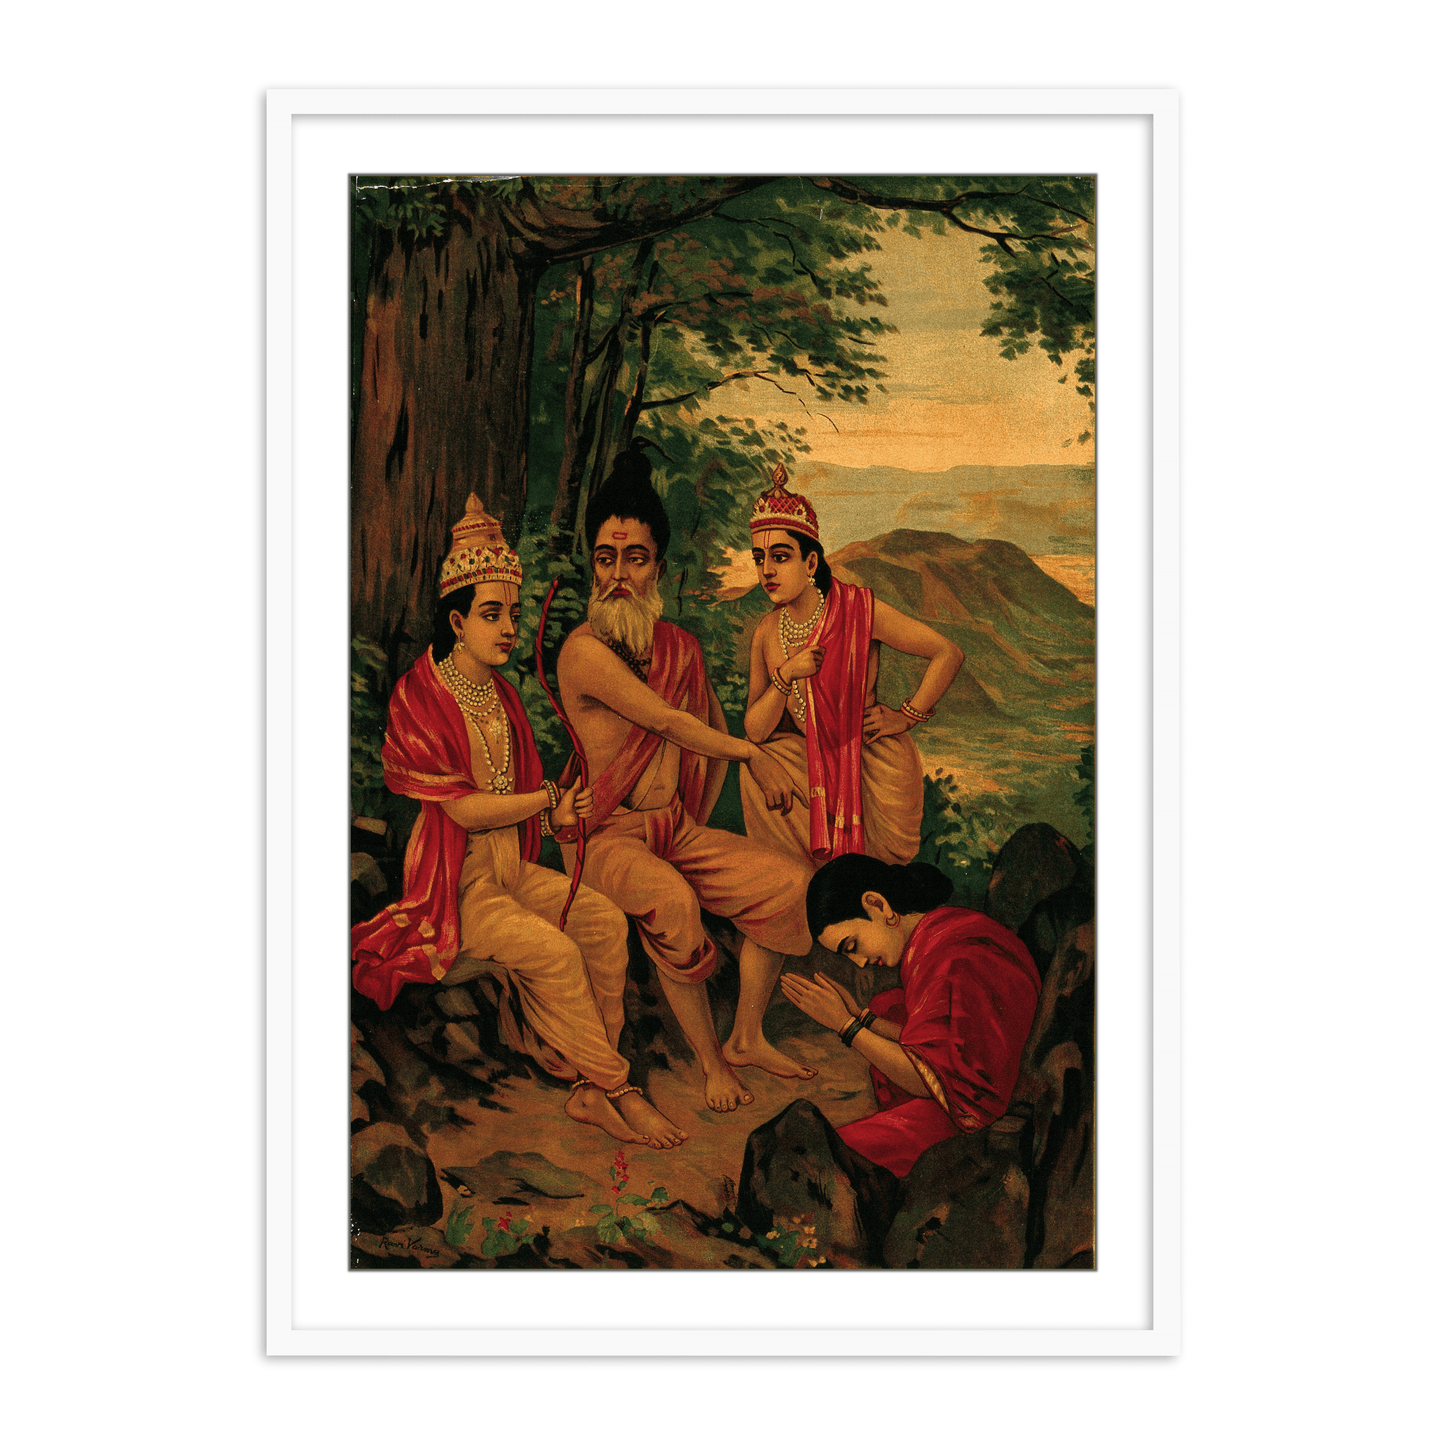 Ahalya the nymph being released from a curse by Rama and Lakshman by Raja Ravi Varma Wall Art